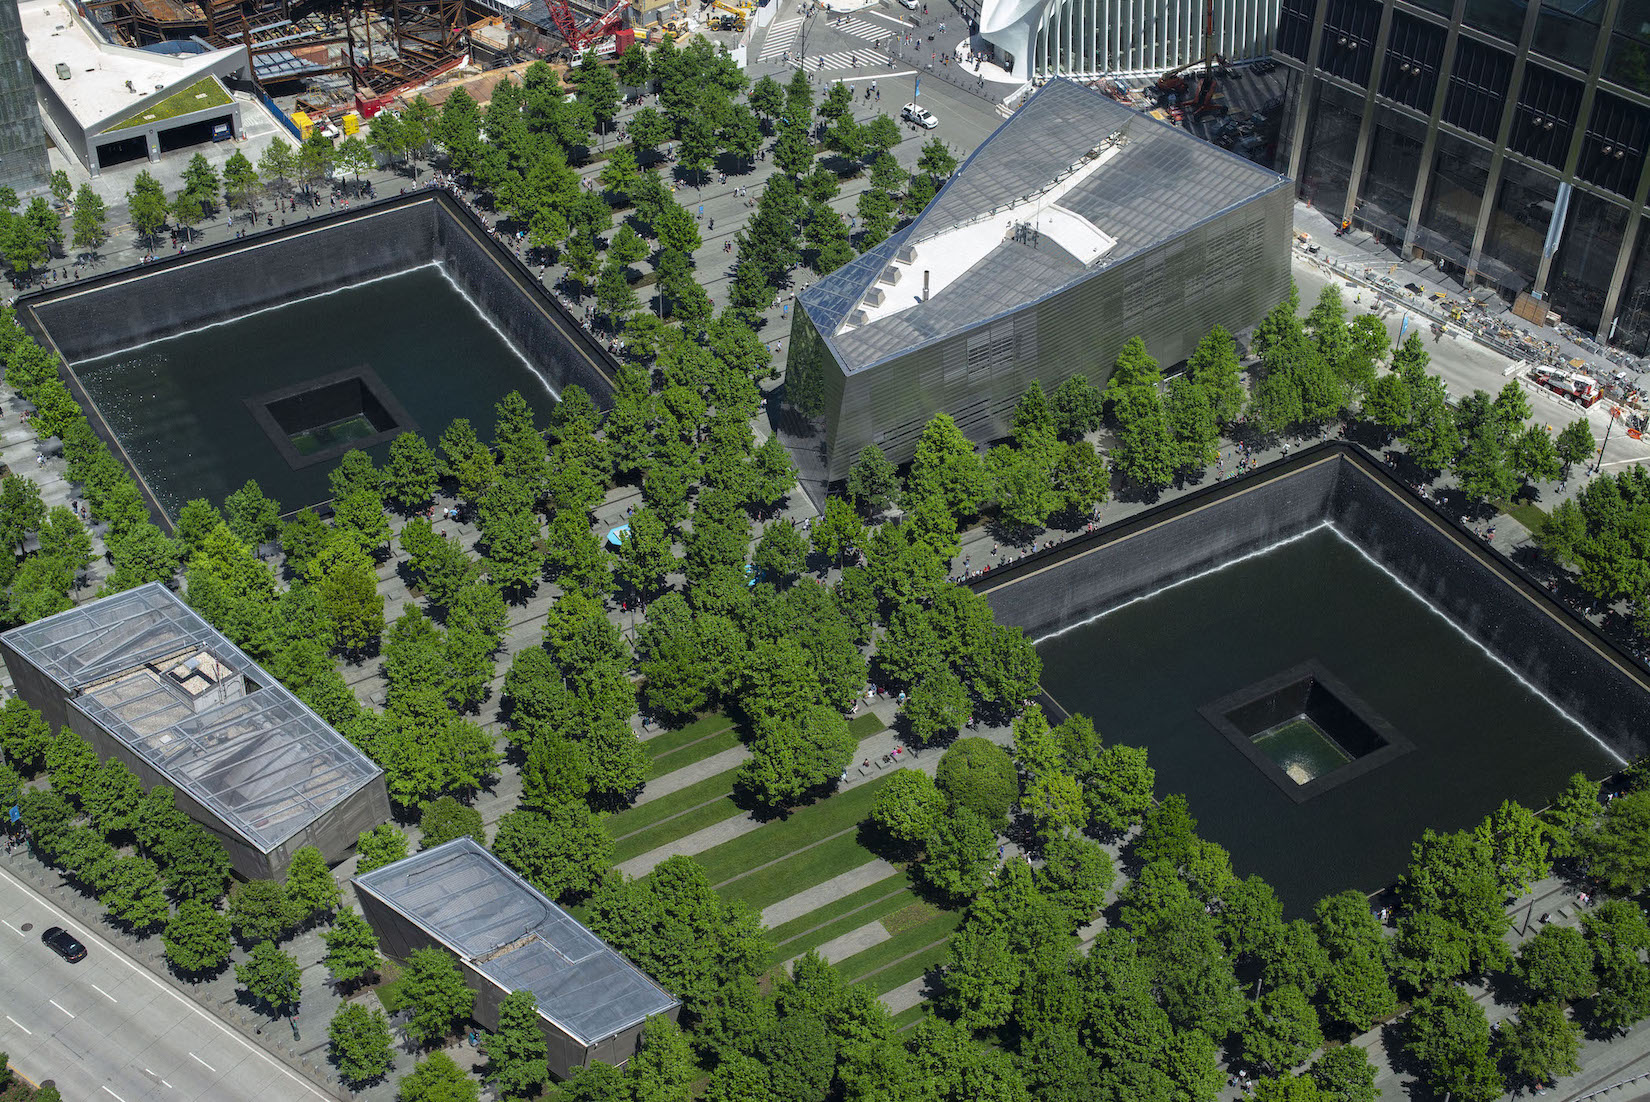 Aerial view of the 9/11 Memorial and Museum on Monday, May 21, 2018. Credit: 9/11 Memorial, Photo by Jin S. Lee